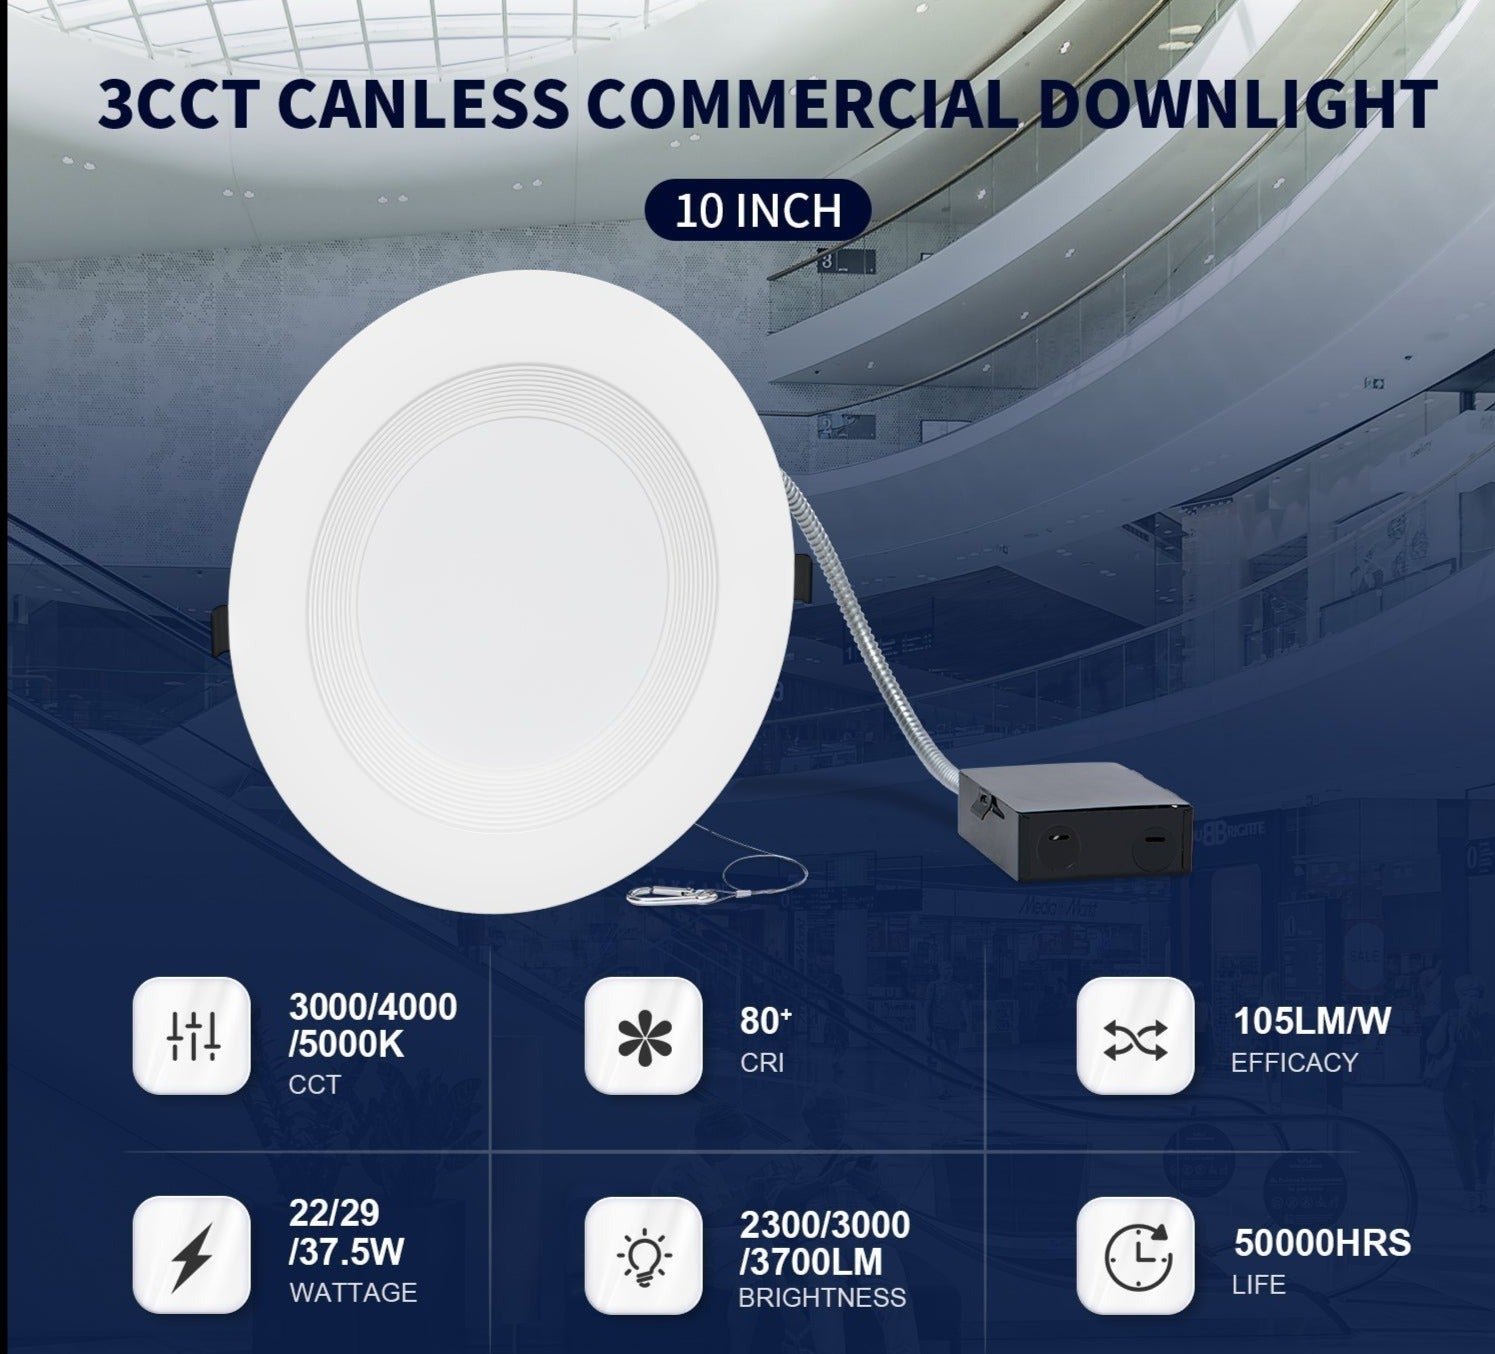 10 Inch Recessed LED Downlight with Junction Box - Selectable Wattage(22/29/37.5W) & CCT(3000K/4000K/5000K), 3700 Lumens, 0-10V Dimming - ETL & Energy Star Listed - Eco LED Lightings 